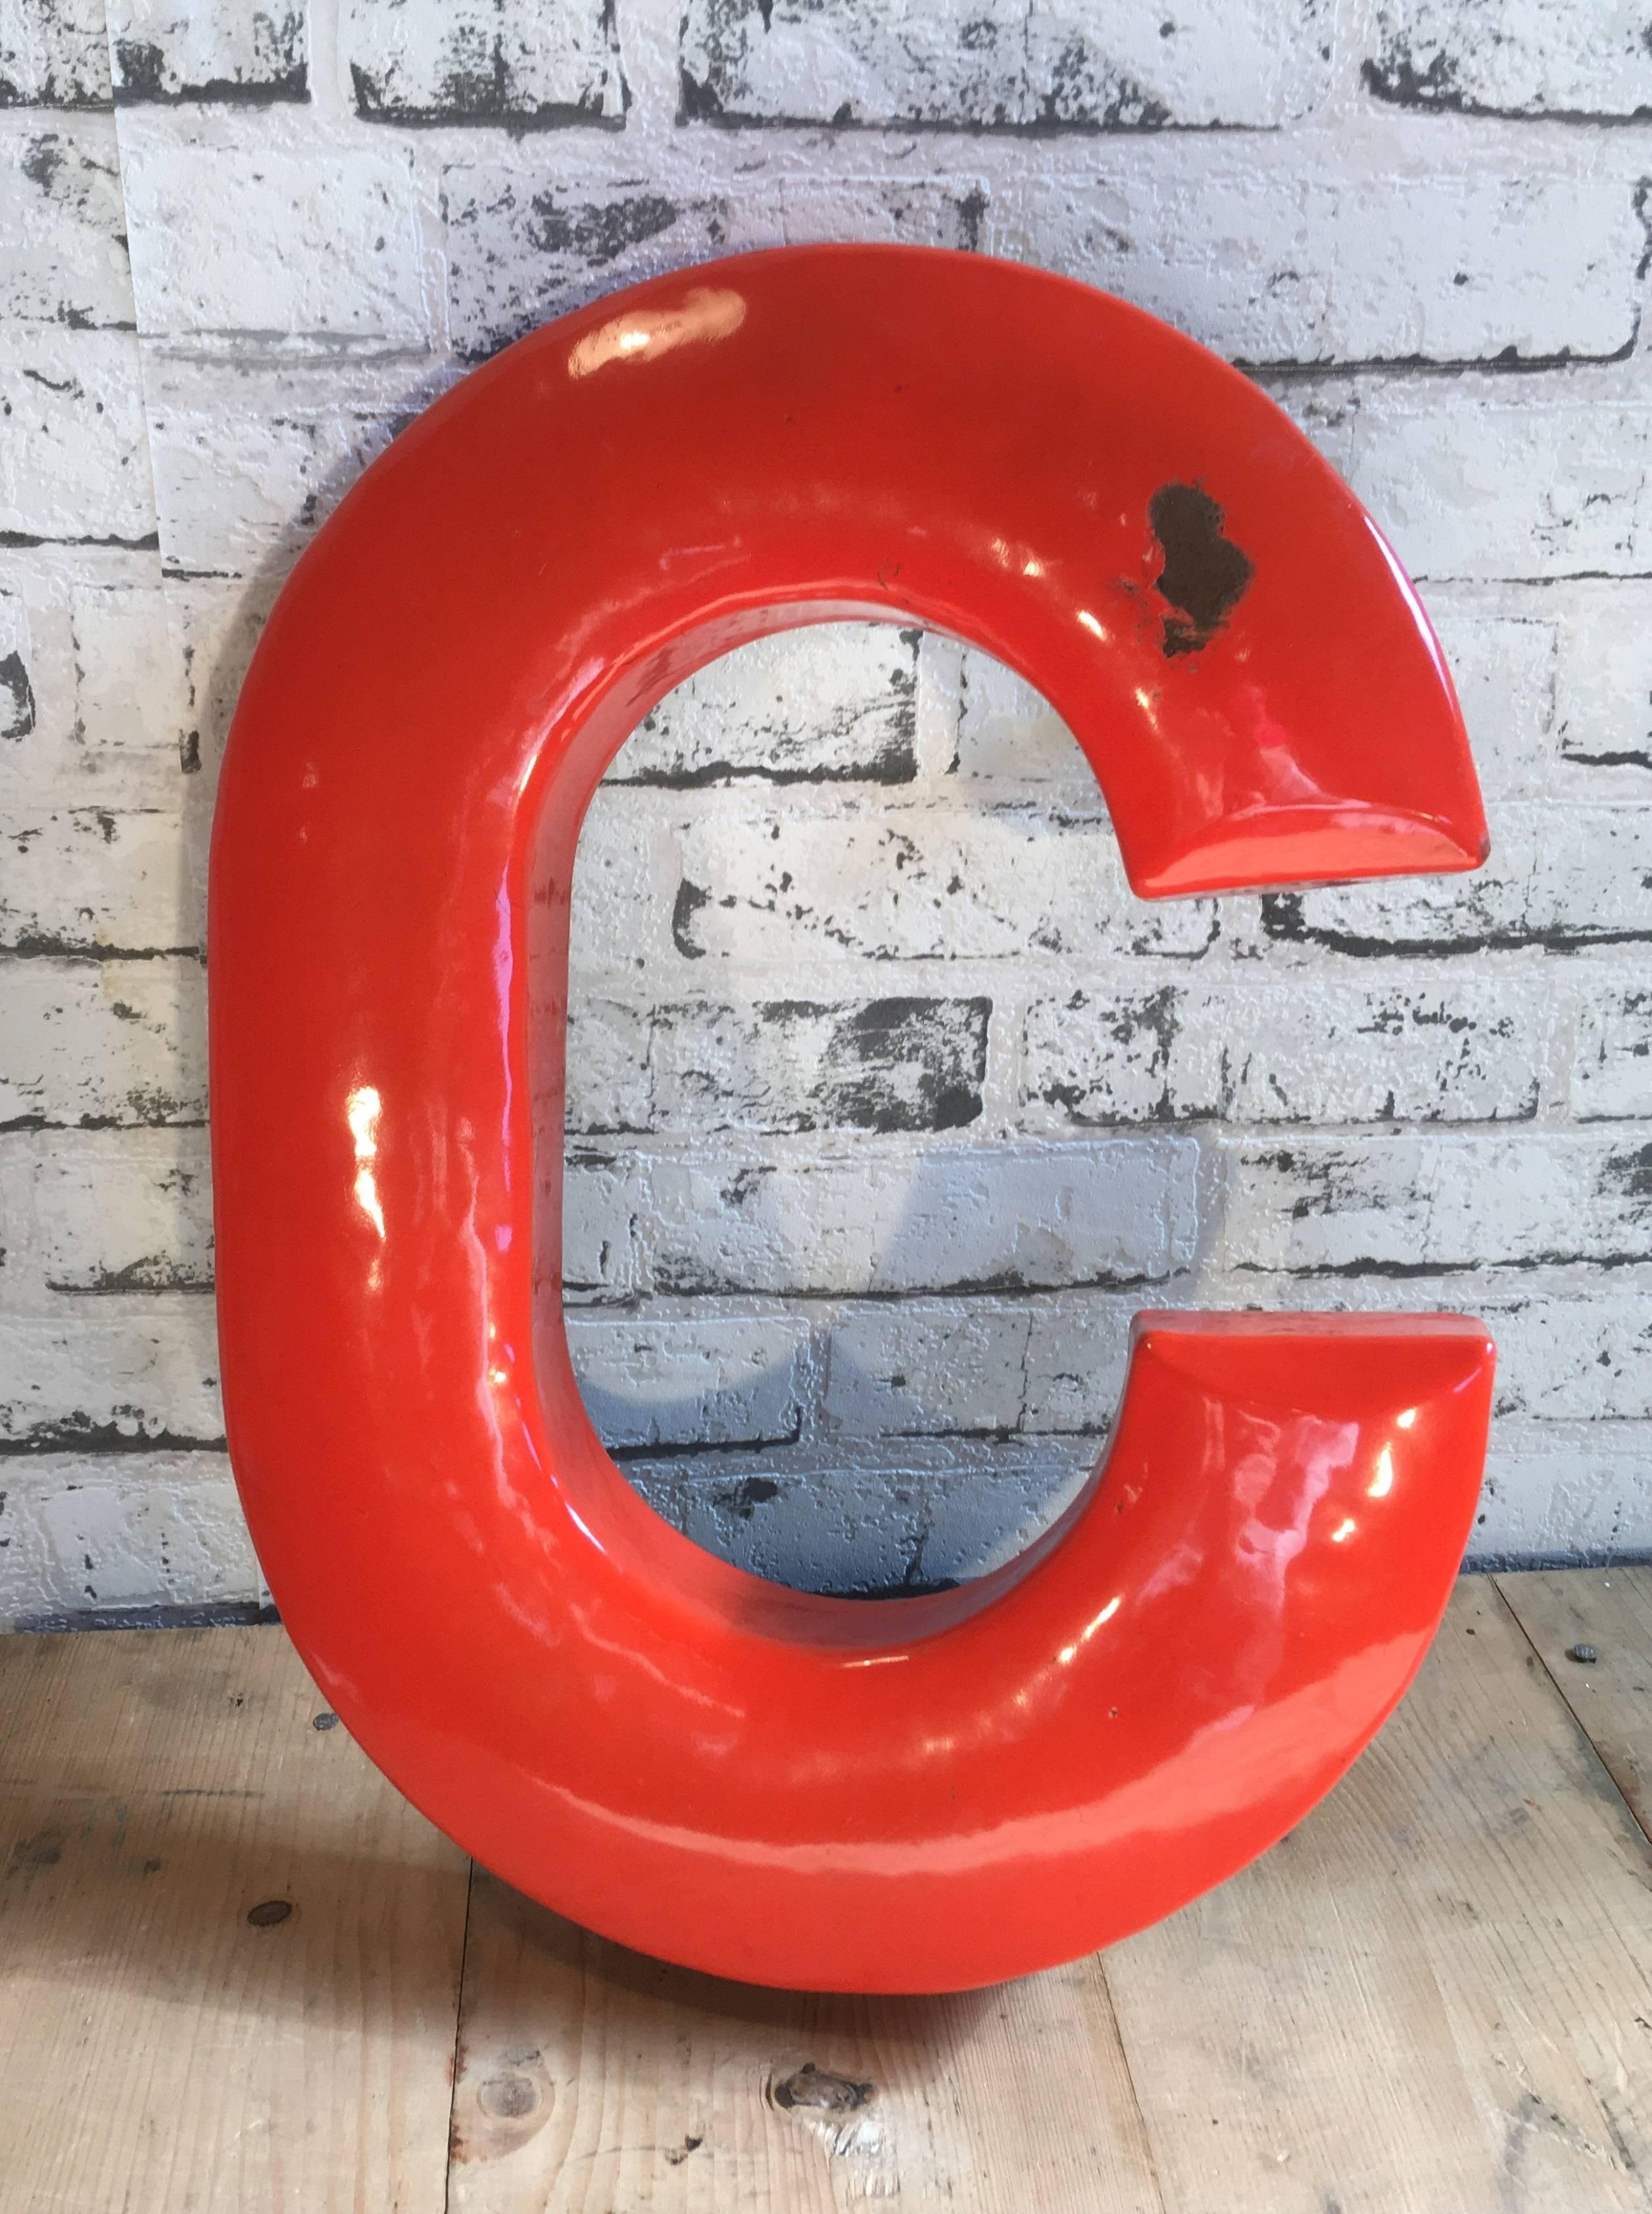 This industrial vintage letter 'C' was manufactured in former Czechoslovakia, 1930s.Comes from an old advertisement.
Letter is made from enameled iron.